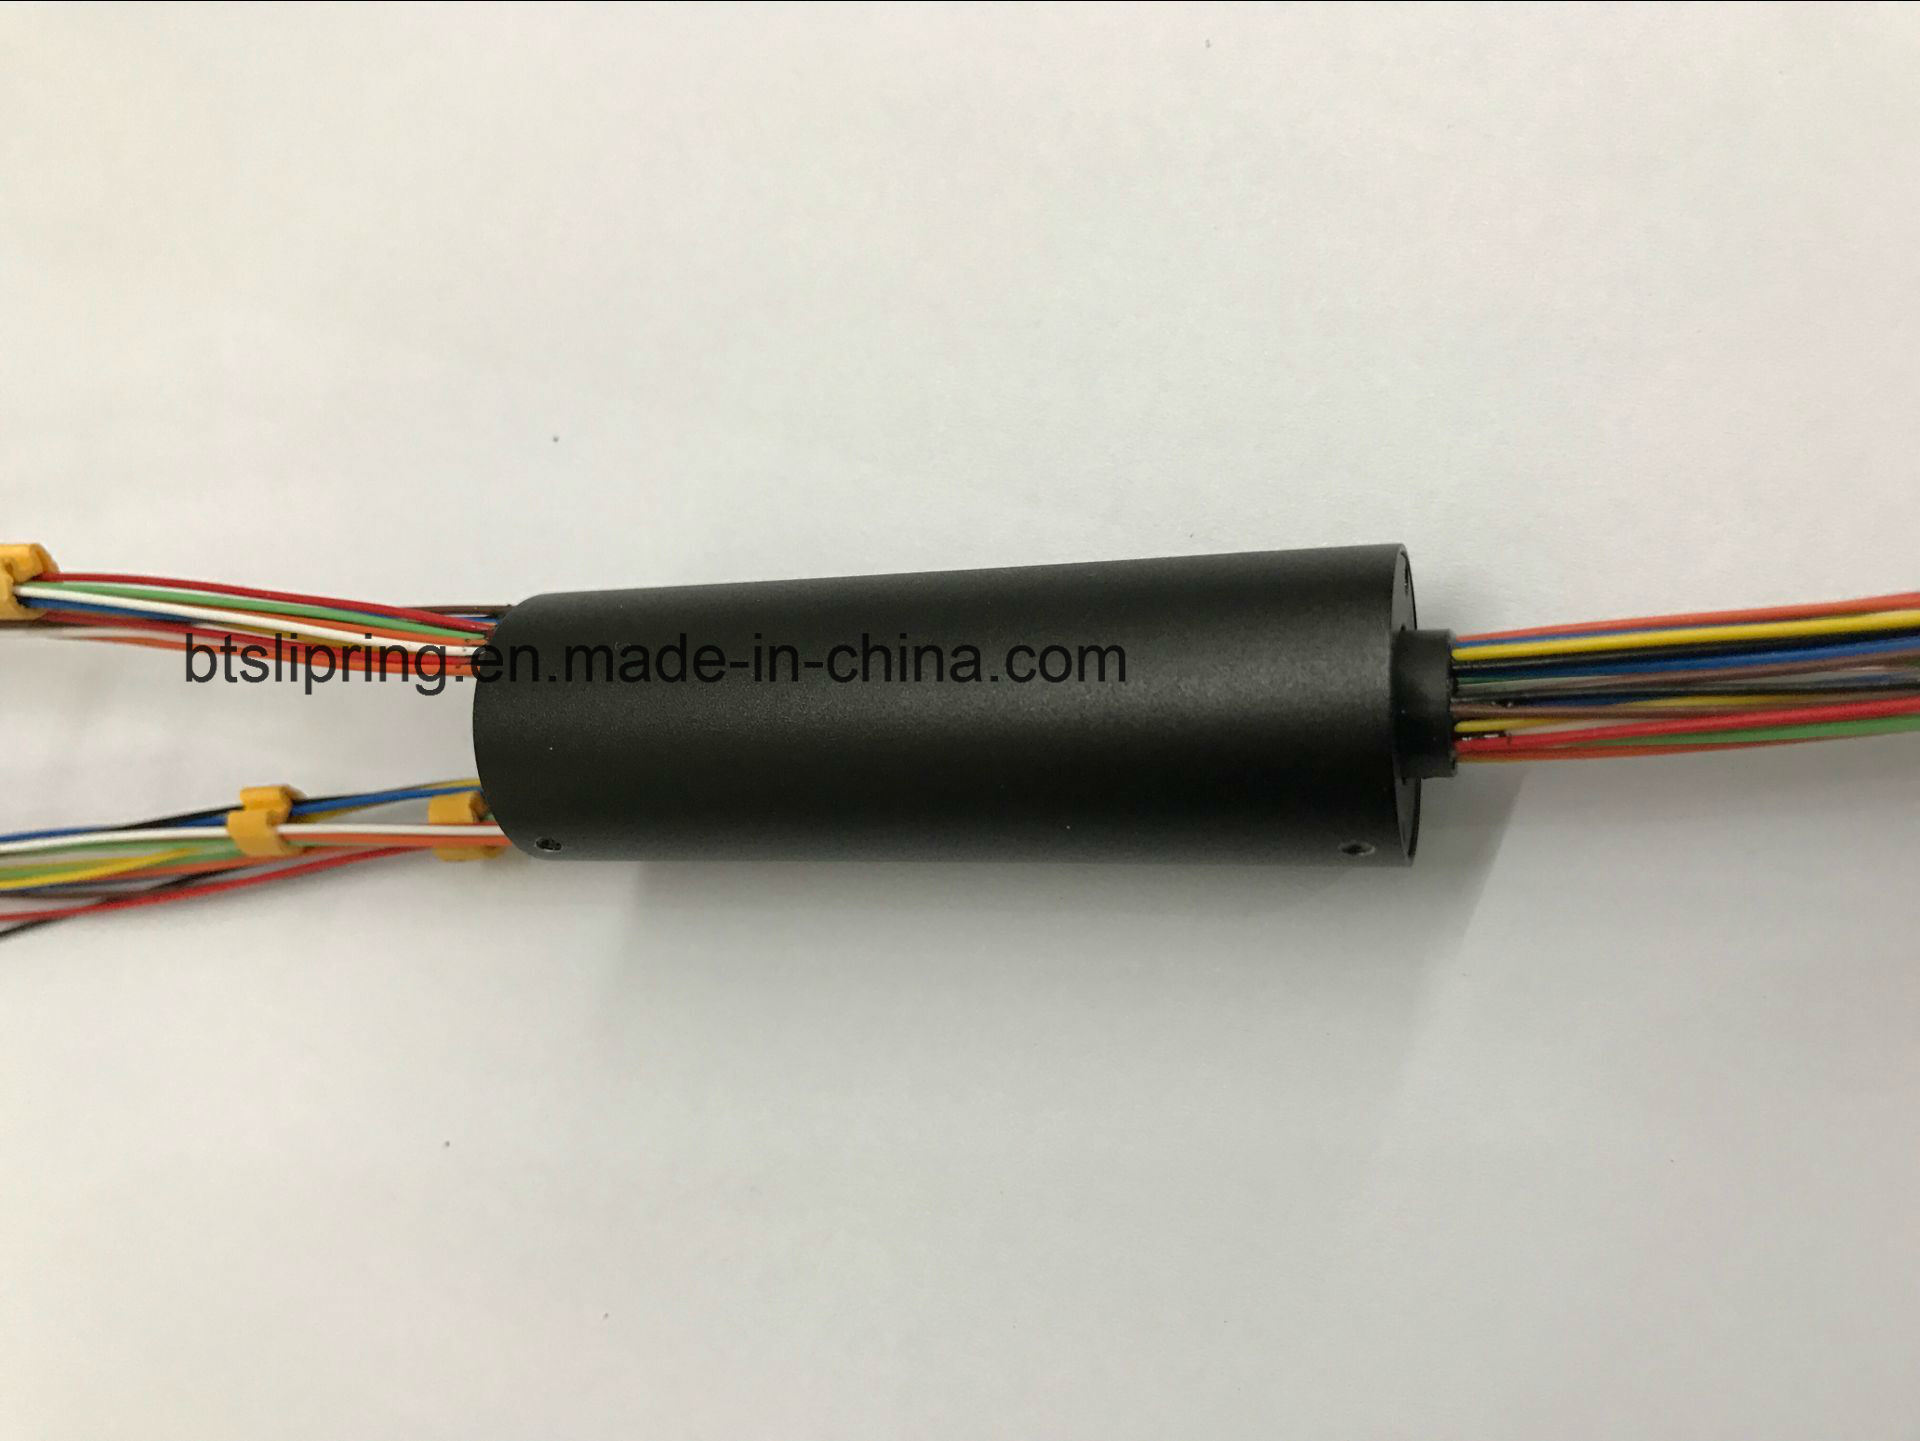 OD 22mm, 32 Circuits with 4mm Though Hole Slip Ring